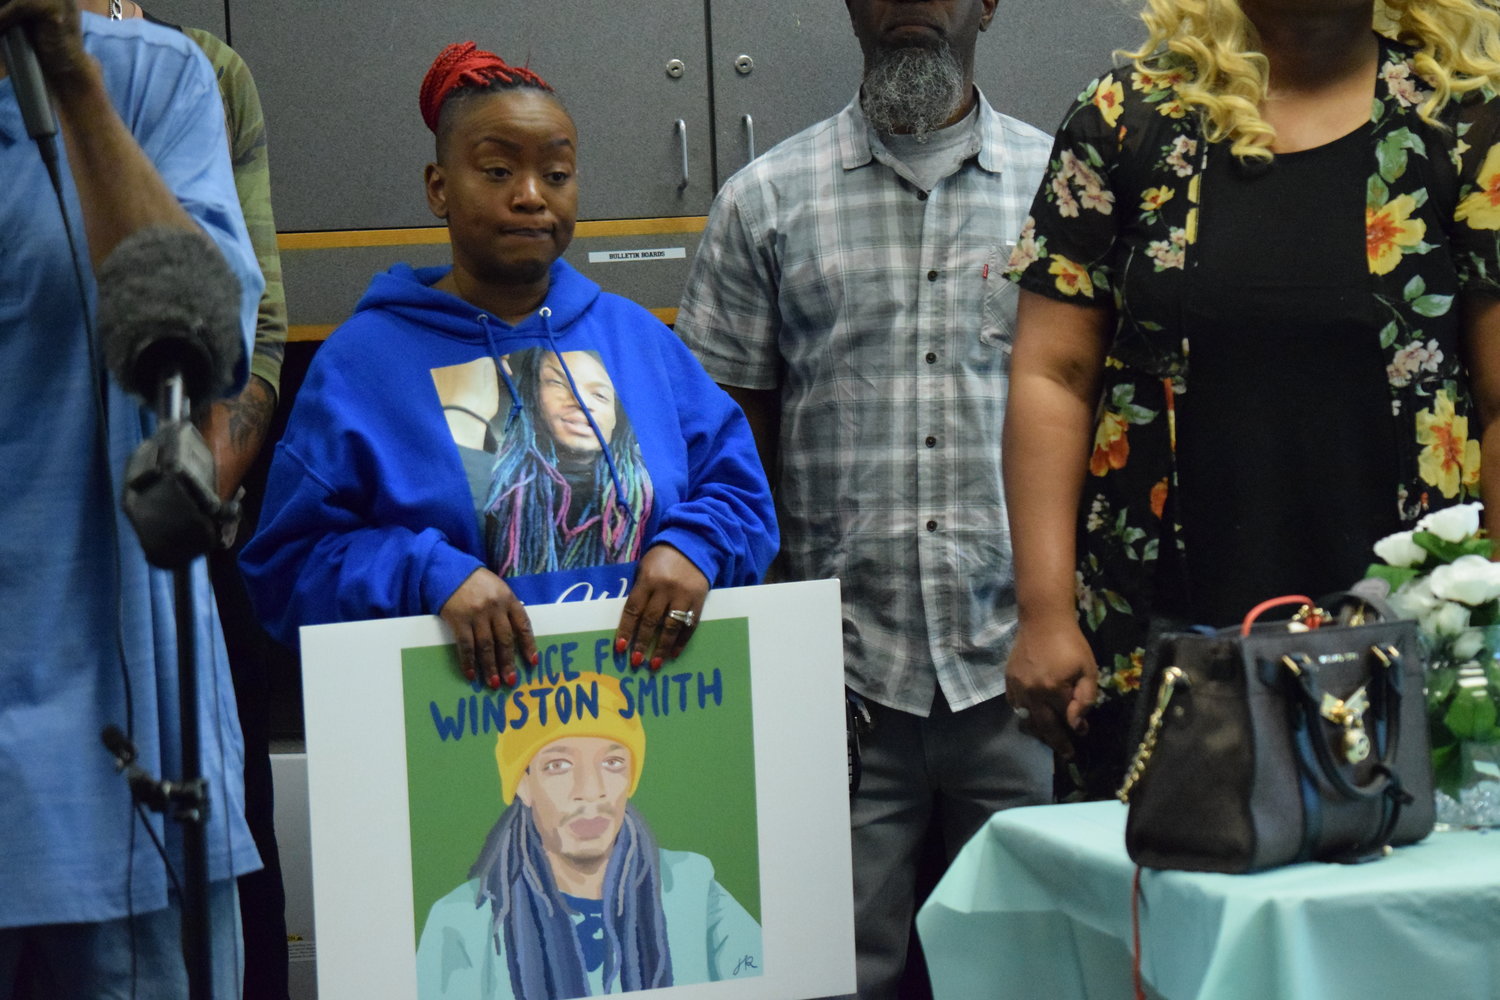 Family members gather in love and solidarity for Winston Smith.